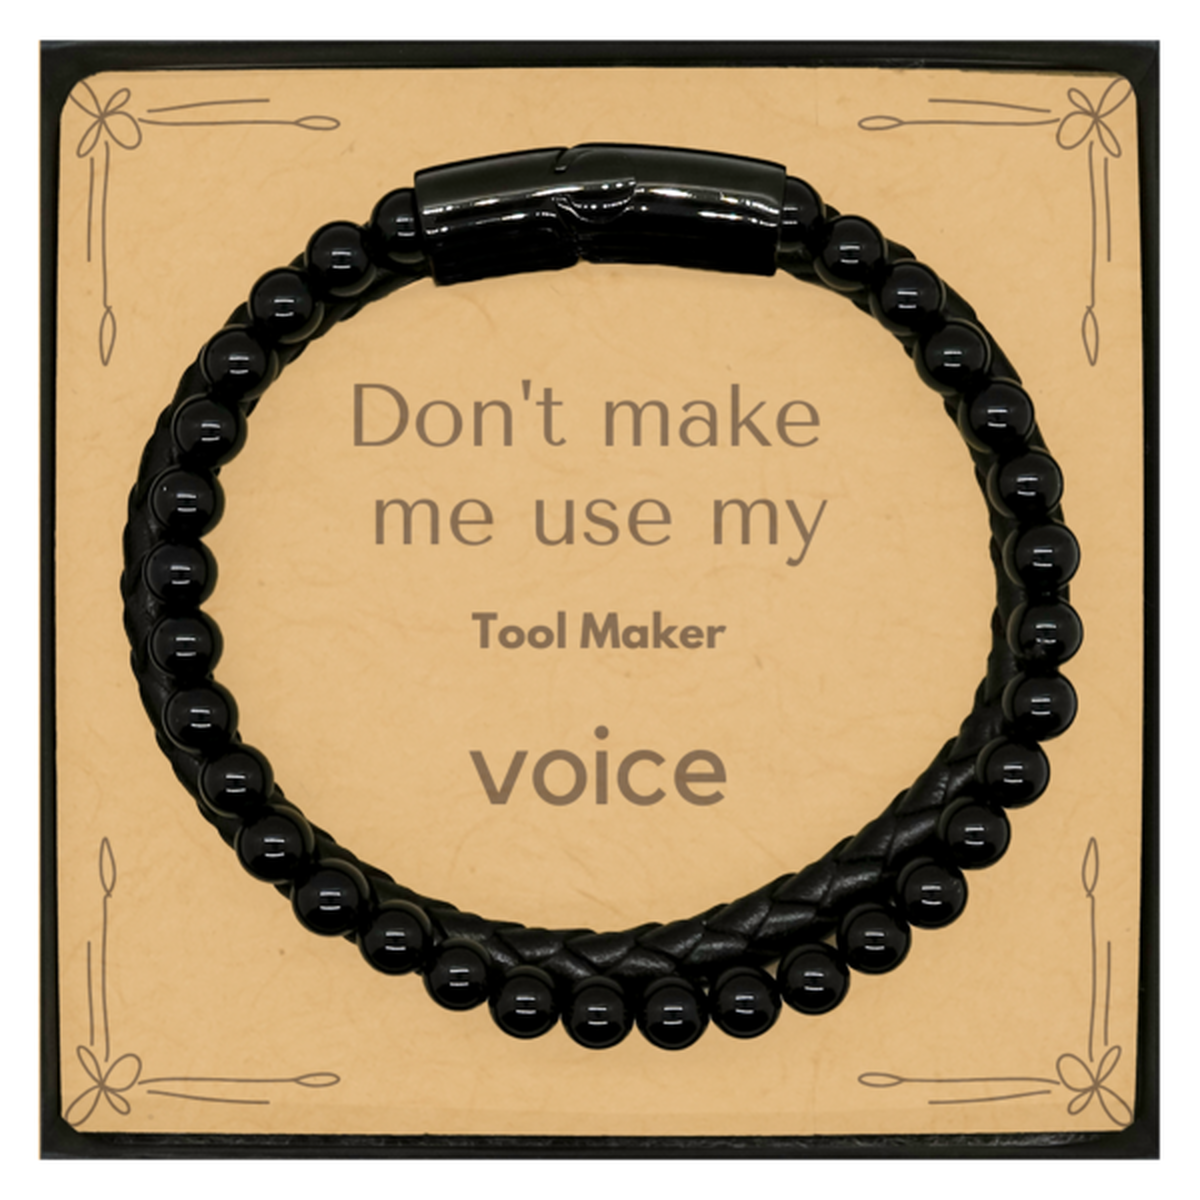 Don't make me use my Tool Maker voice, Sarcasm Tool Maker Card Gifts, Christmas Tool Maker Stone Leather Bracelets Birthday Unique Gifts For Tool Maker Coworkers, Men, Women, Colleague, Friends